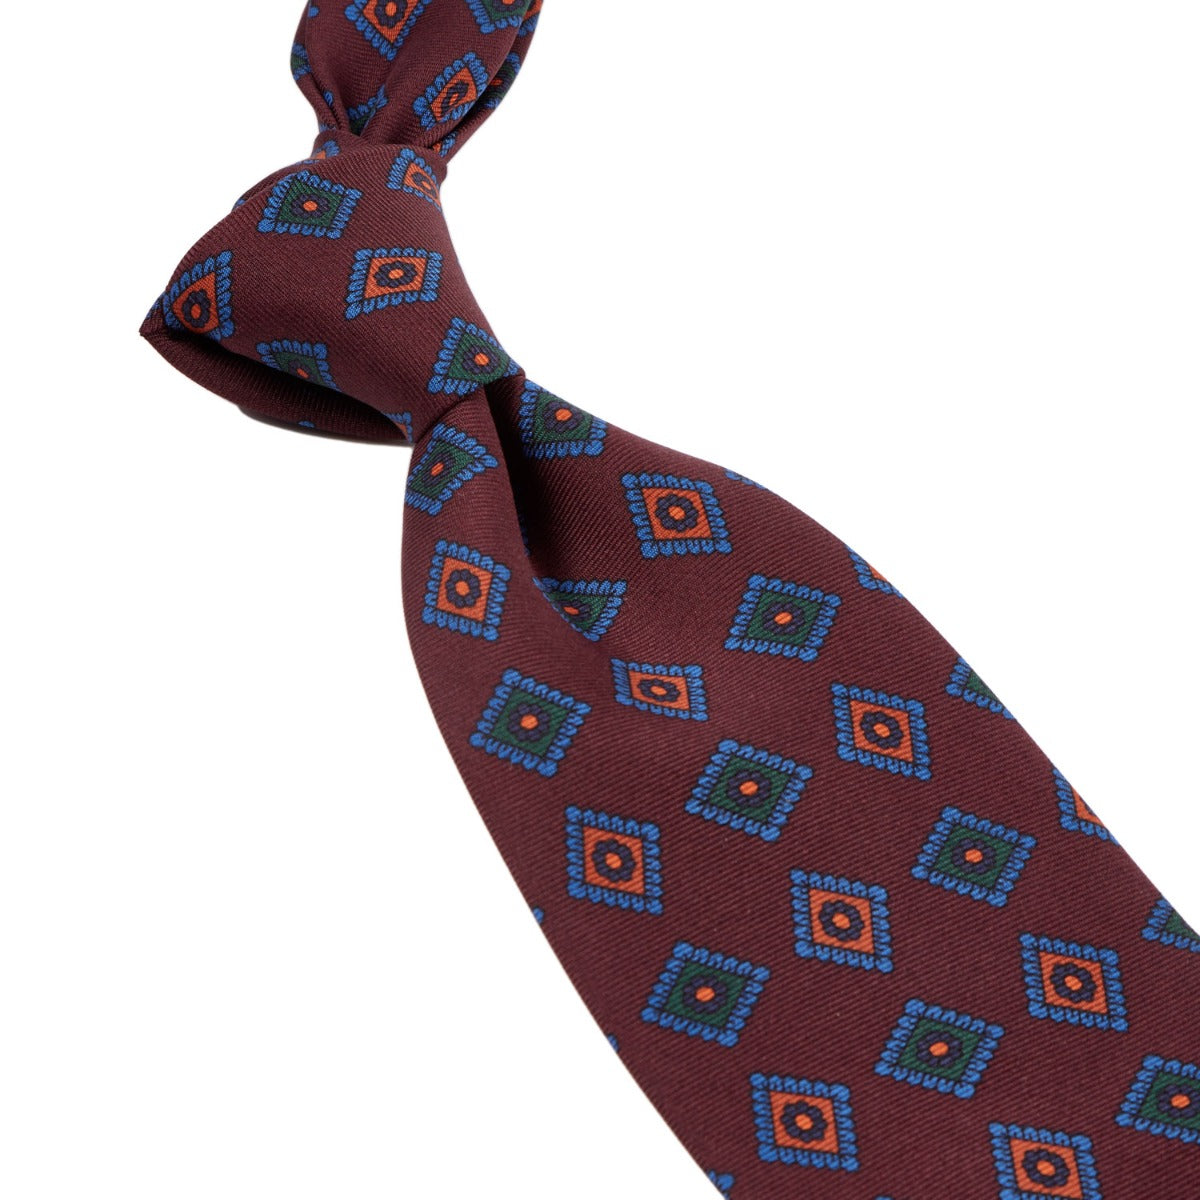 A Sovereign Grade Burgundy Art Deco Ancient Madder Silk Tie with blue and orange designs from KirbyAllison.com.